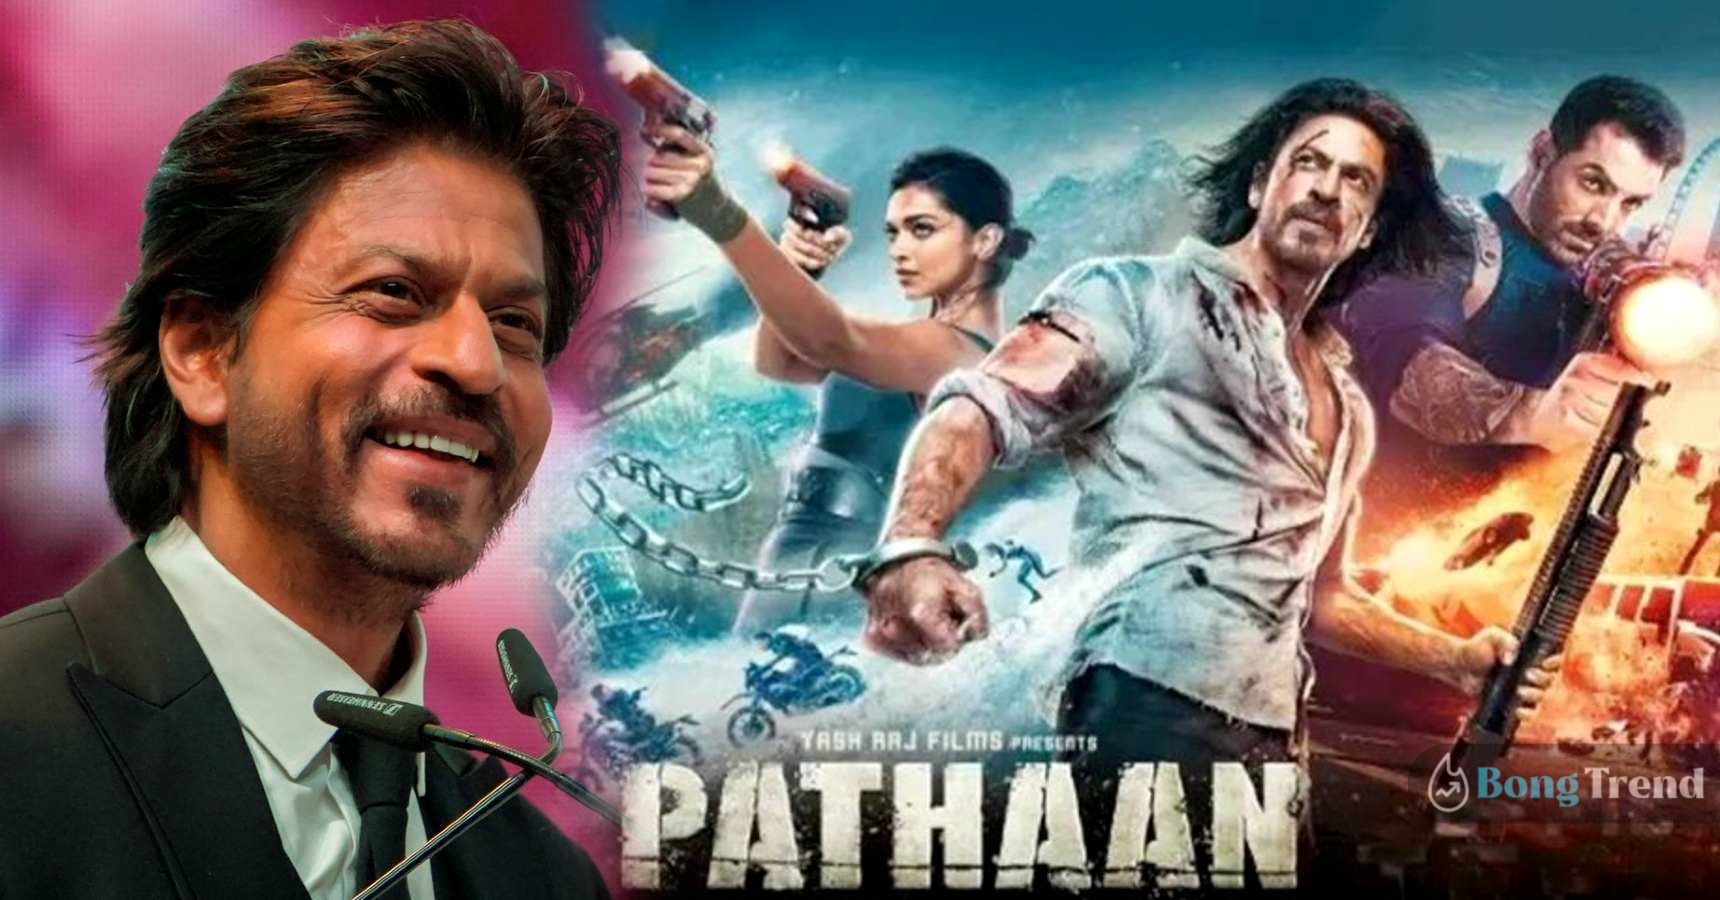 Shahrukh Khan Pathaan Movie Collects 200 Cr in 2 Dasys makes new record world wide